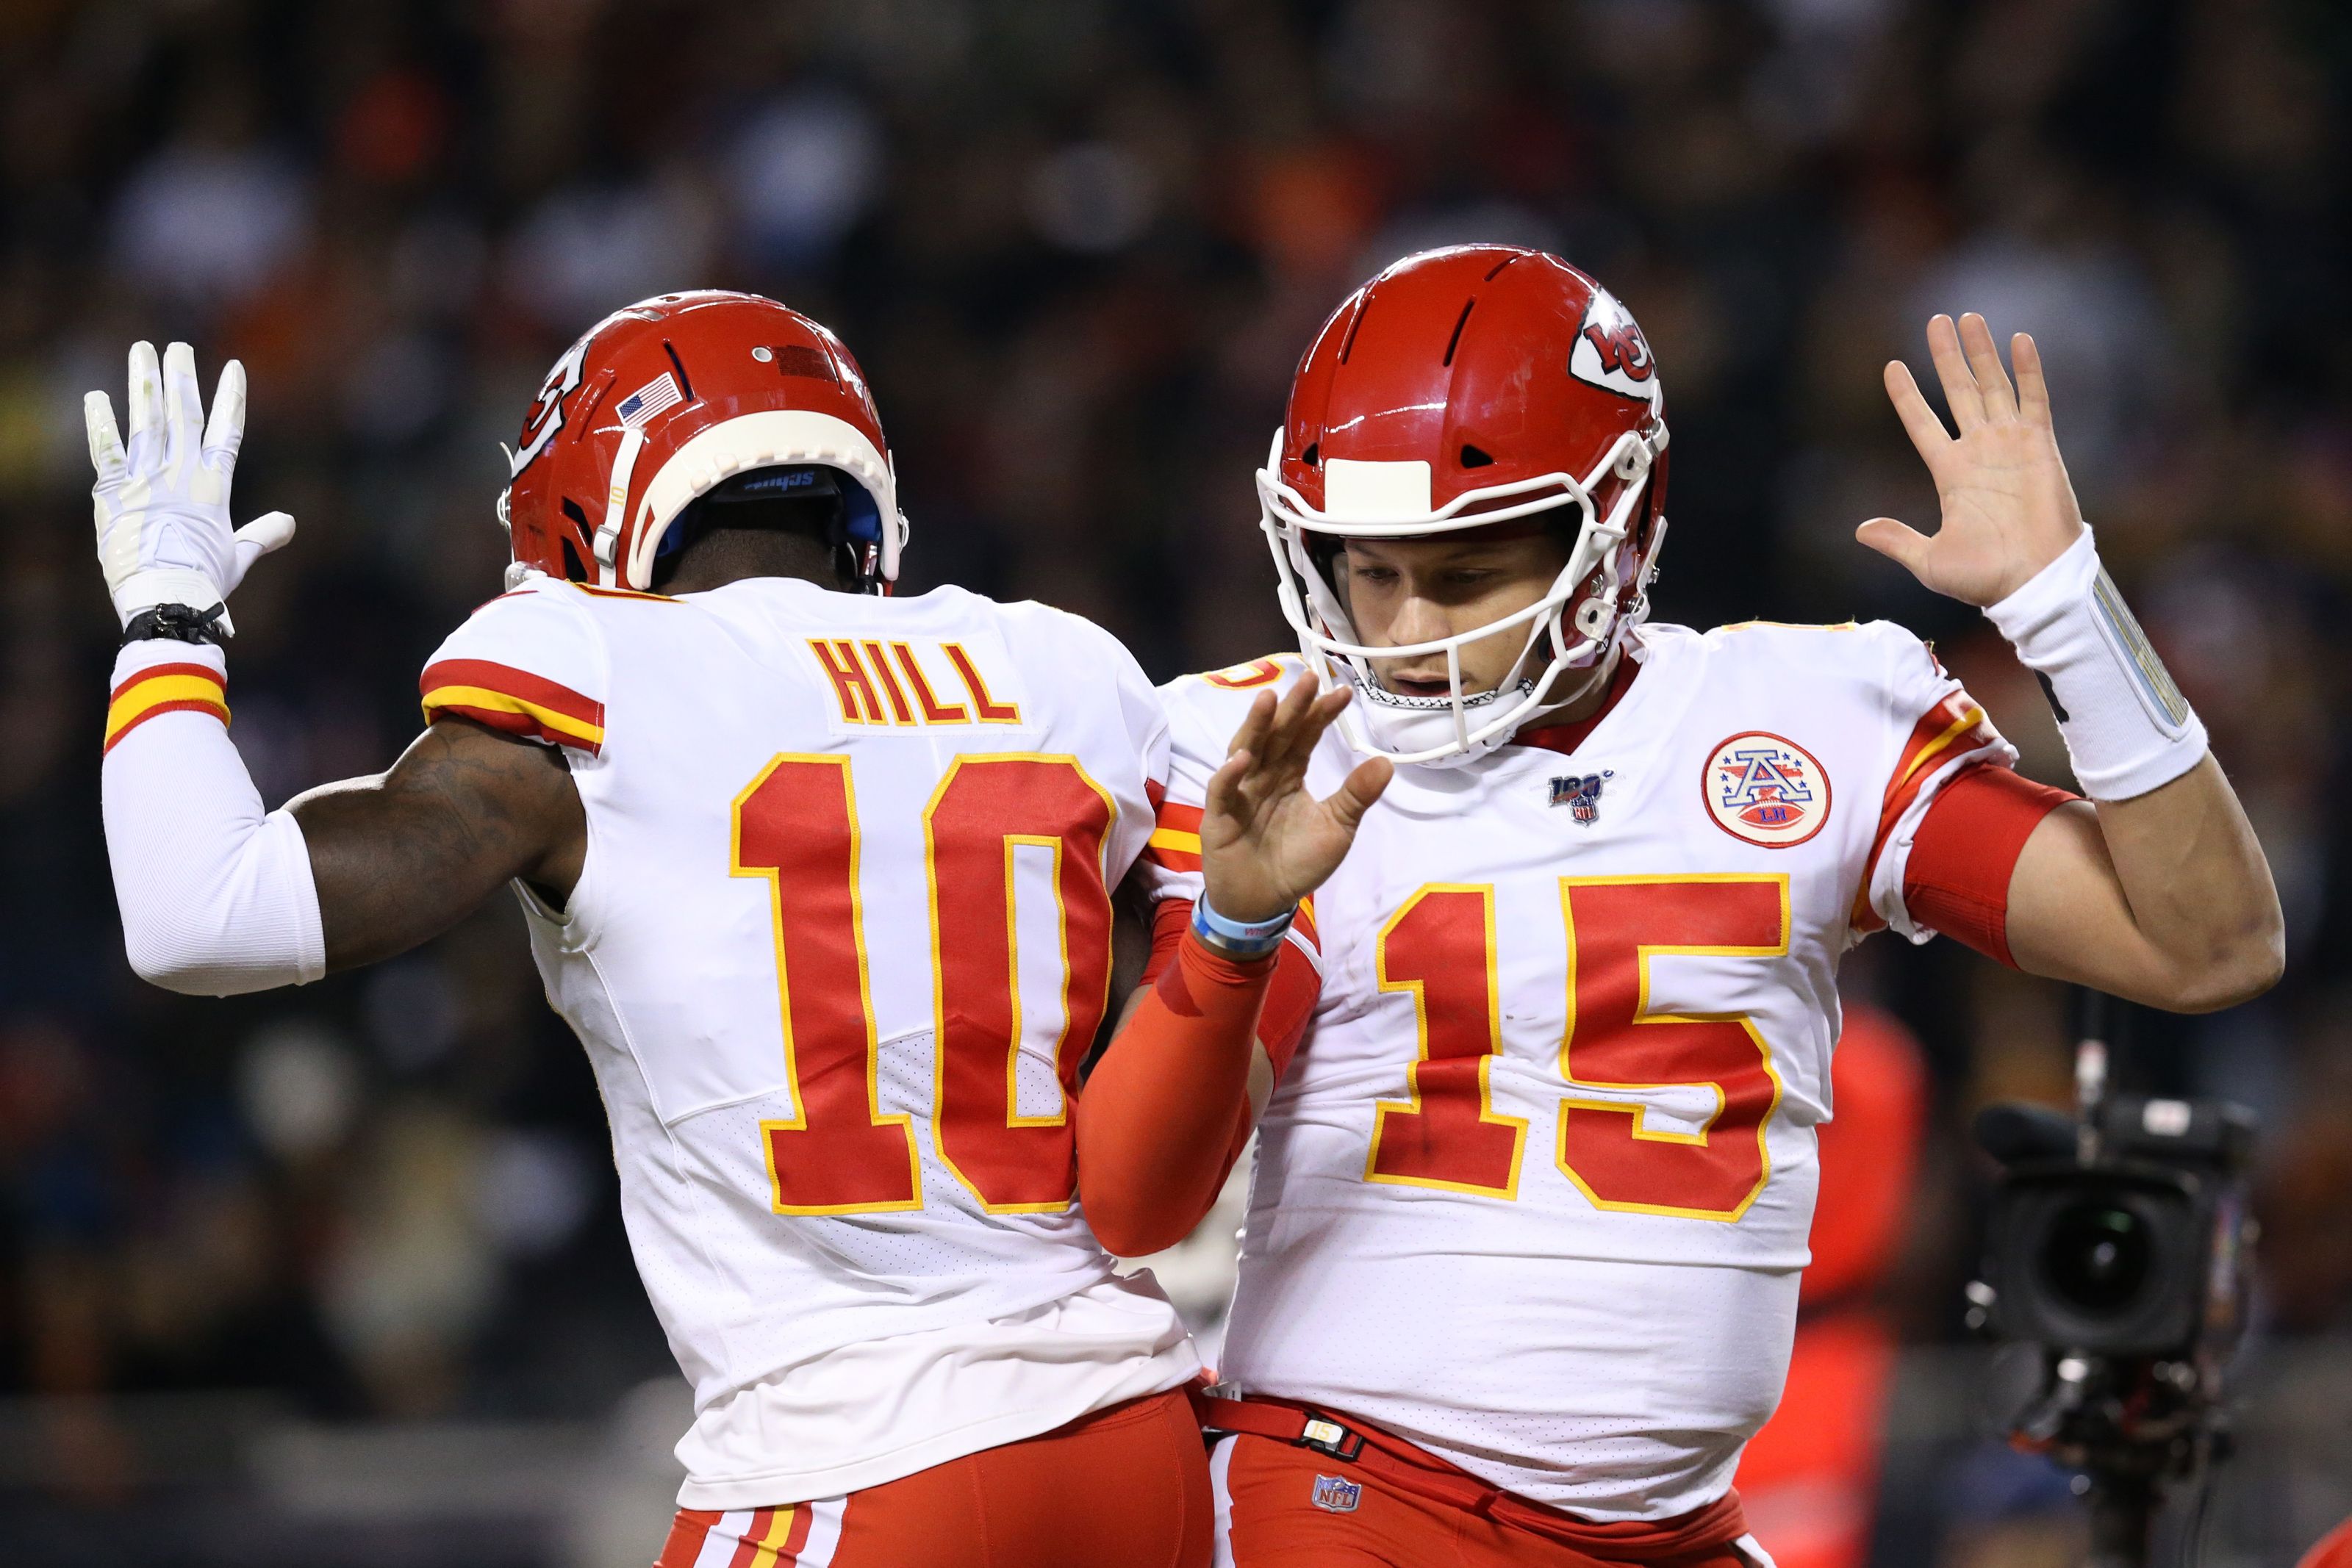 Patrick Mahomes trolls Tyreek Hill for losing a step with playful tweet